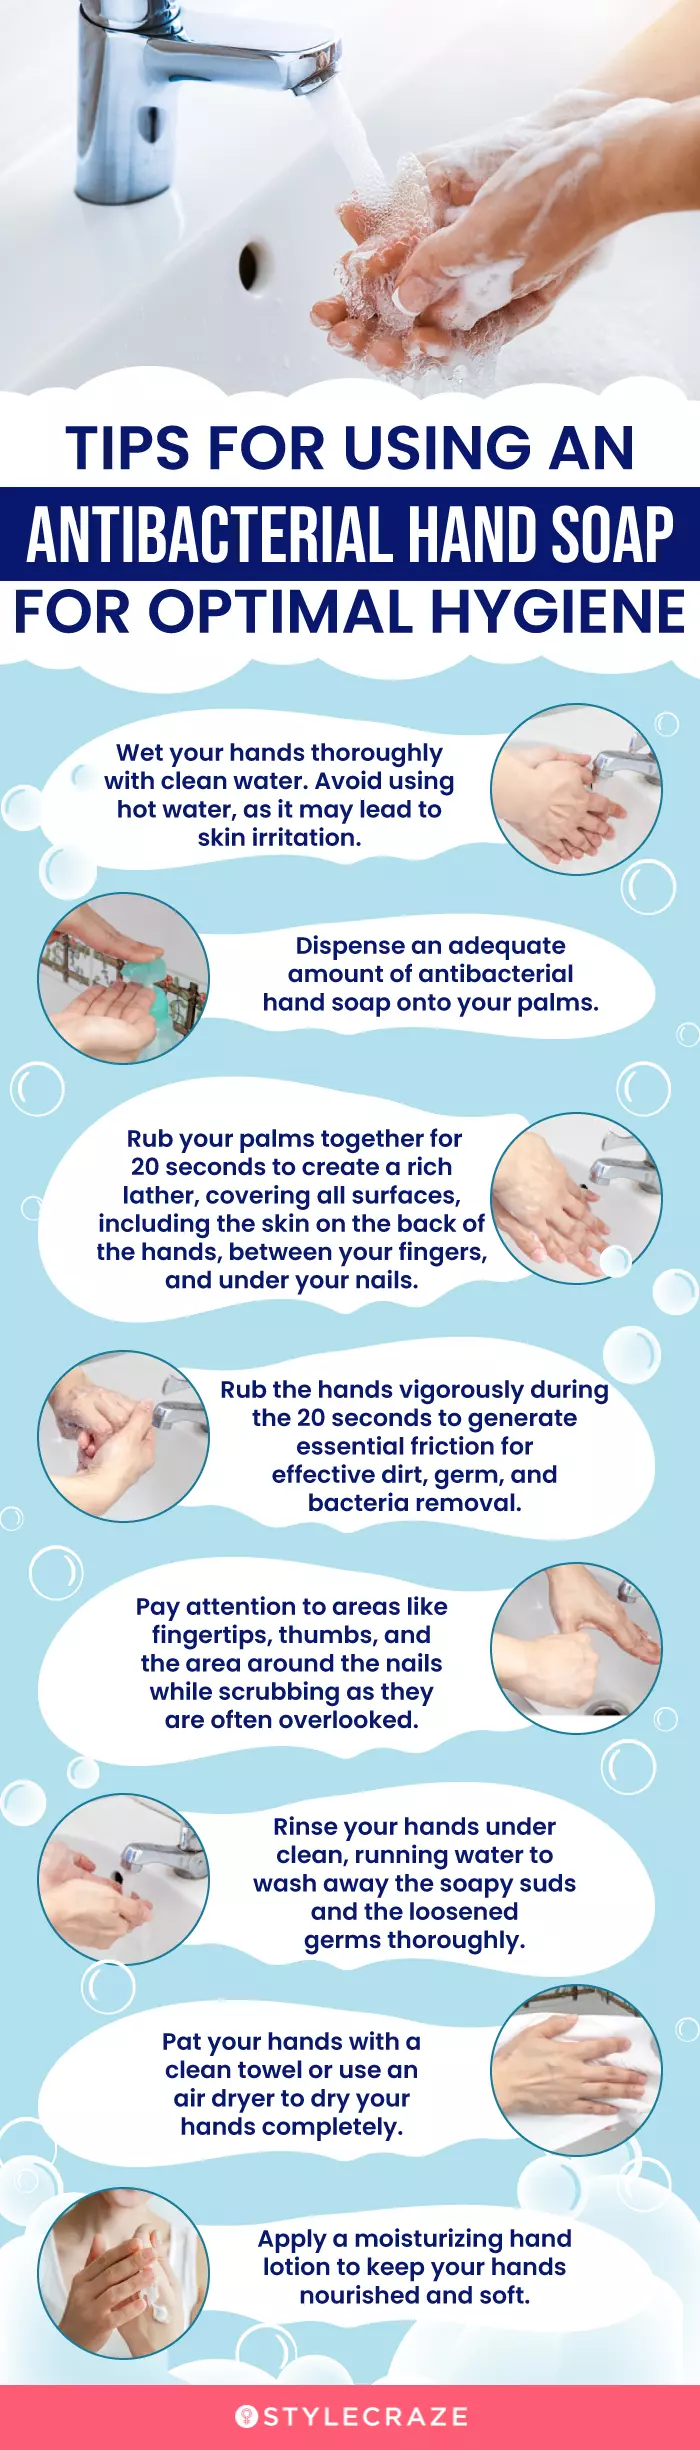 Tips For Using An Antibacterial Hand Soap For Optimal Hygiene (infographic)